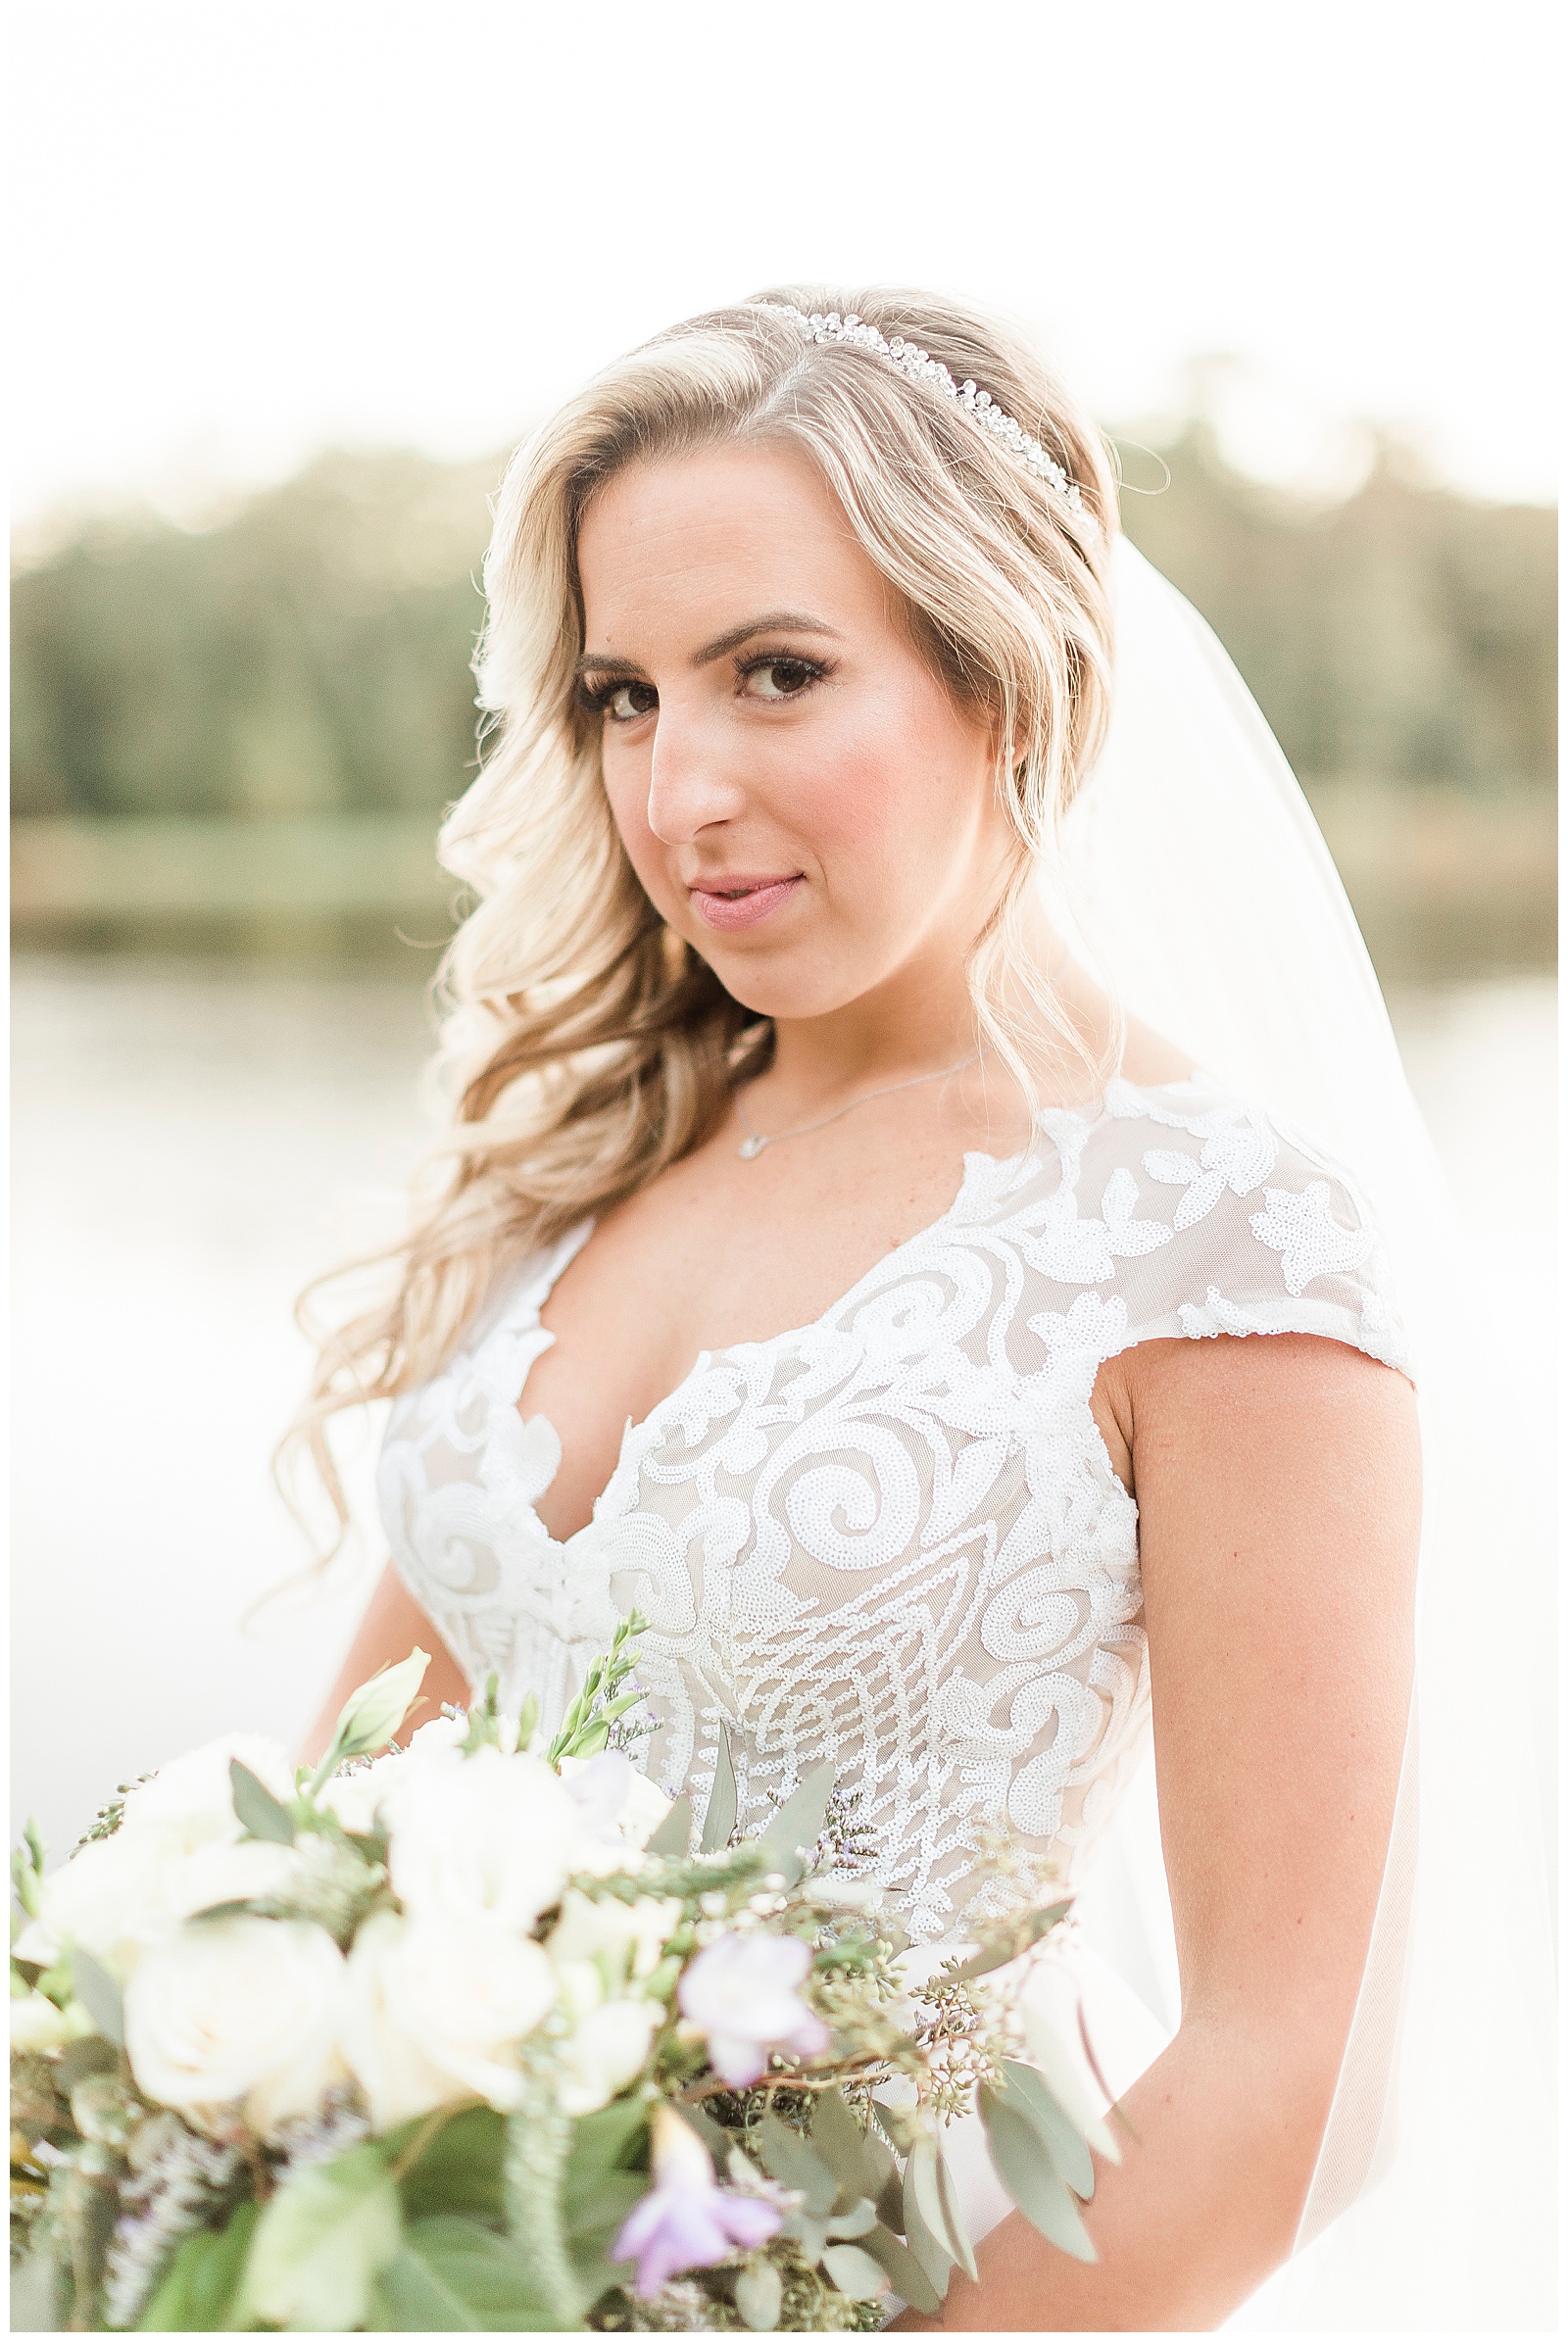 Wedding Photos at The Mill Lakeside Manor